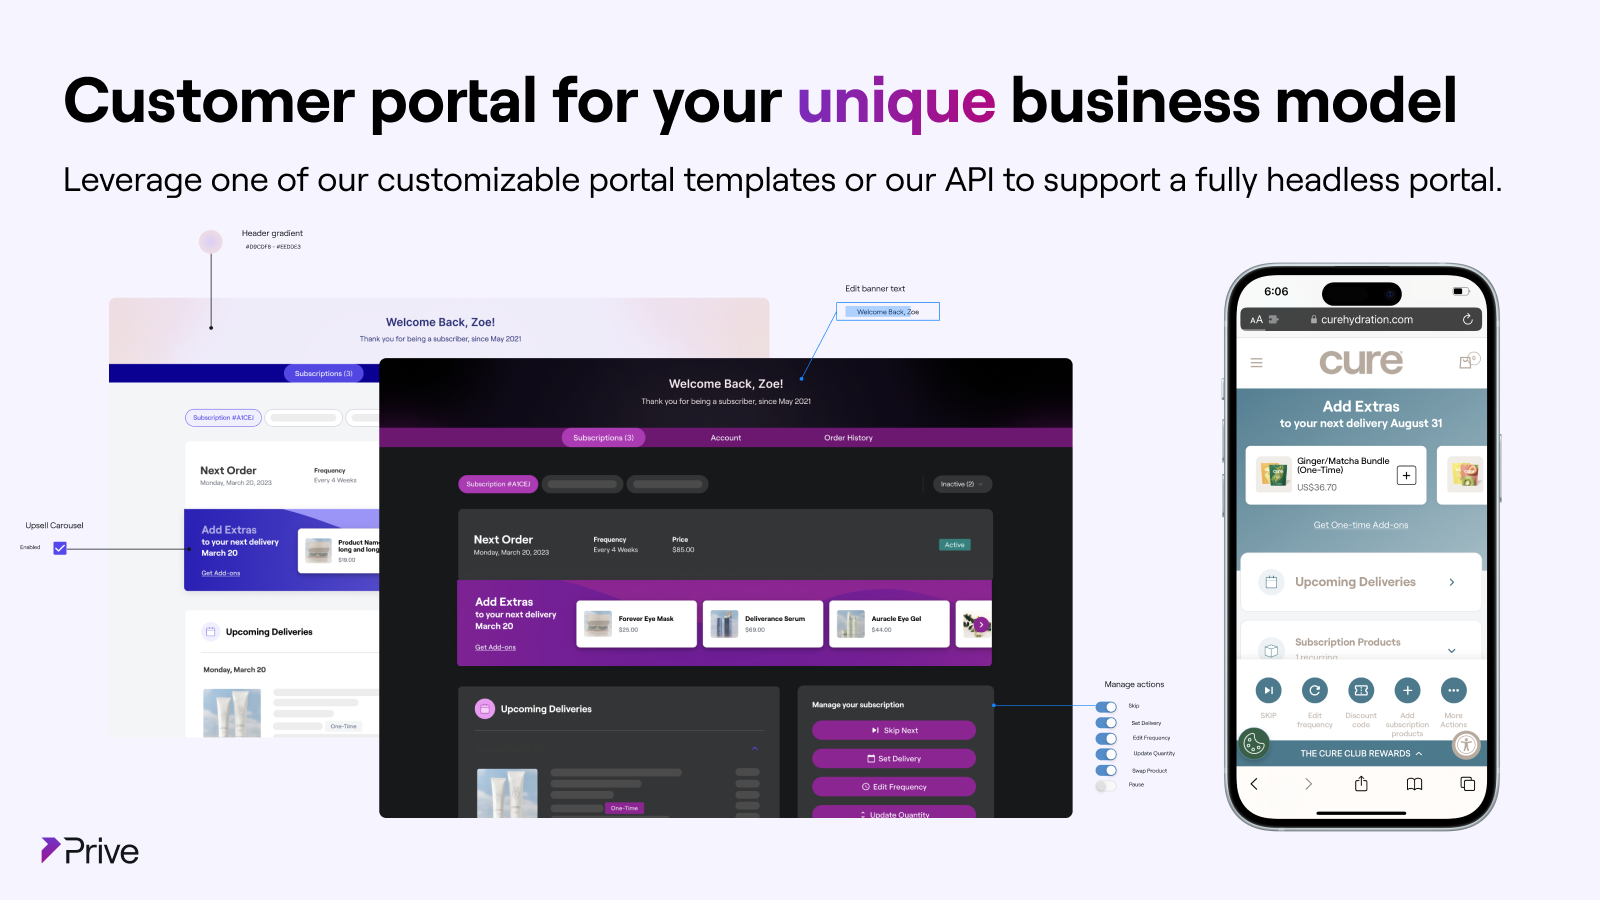 Customer portal for your unique business needs